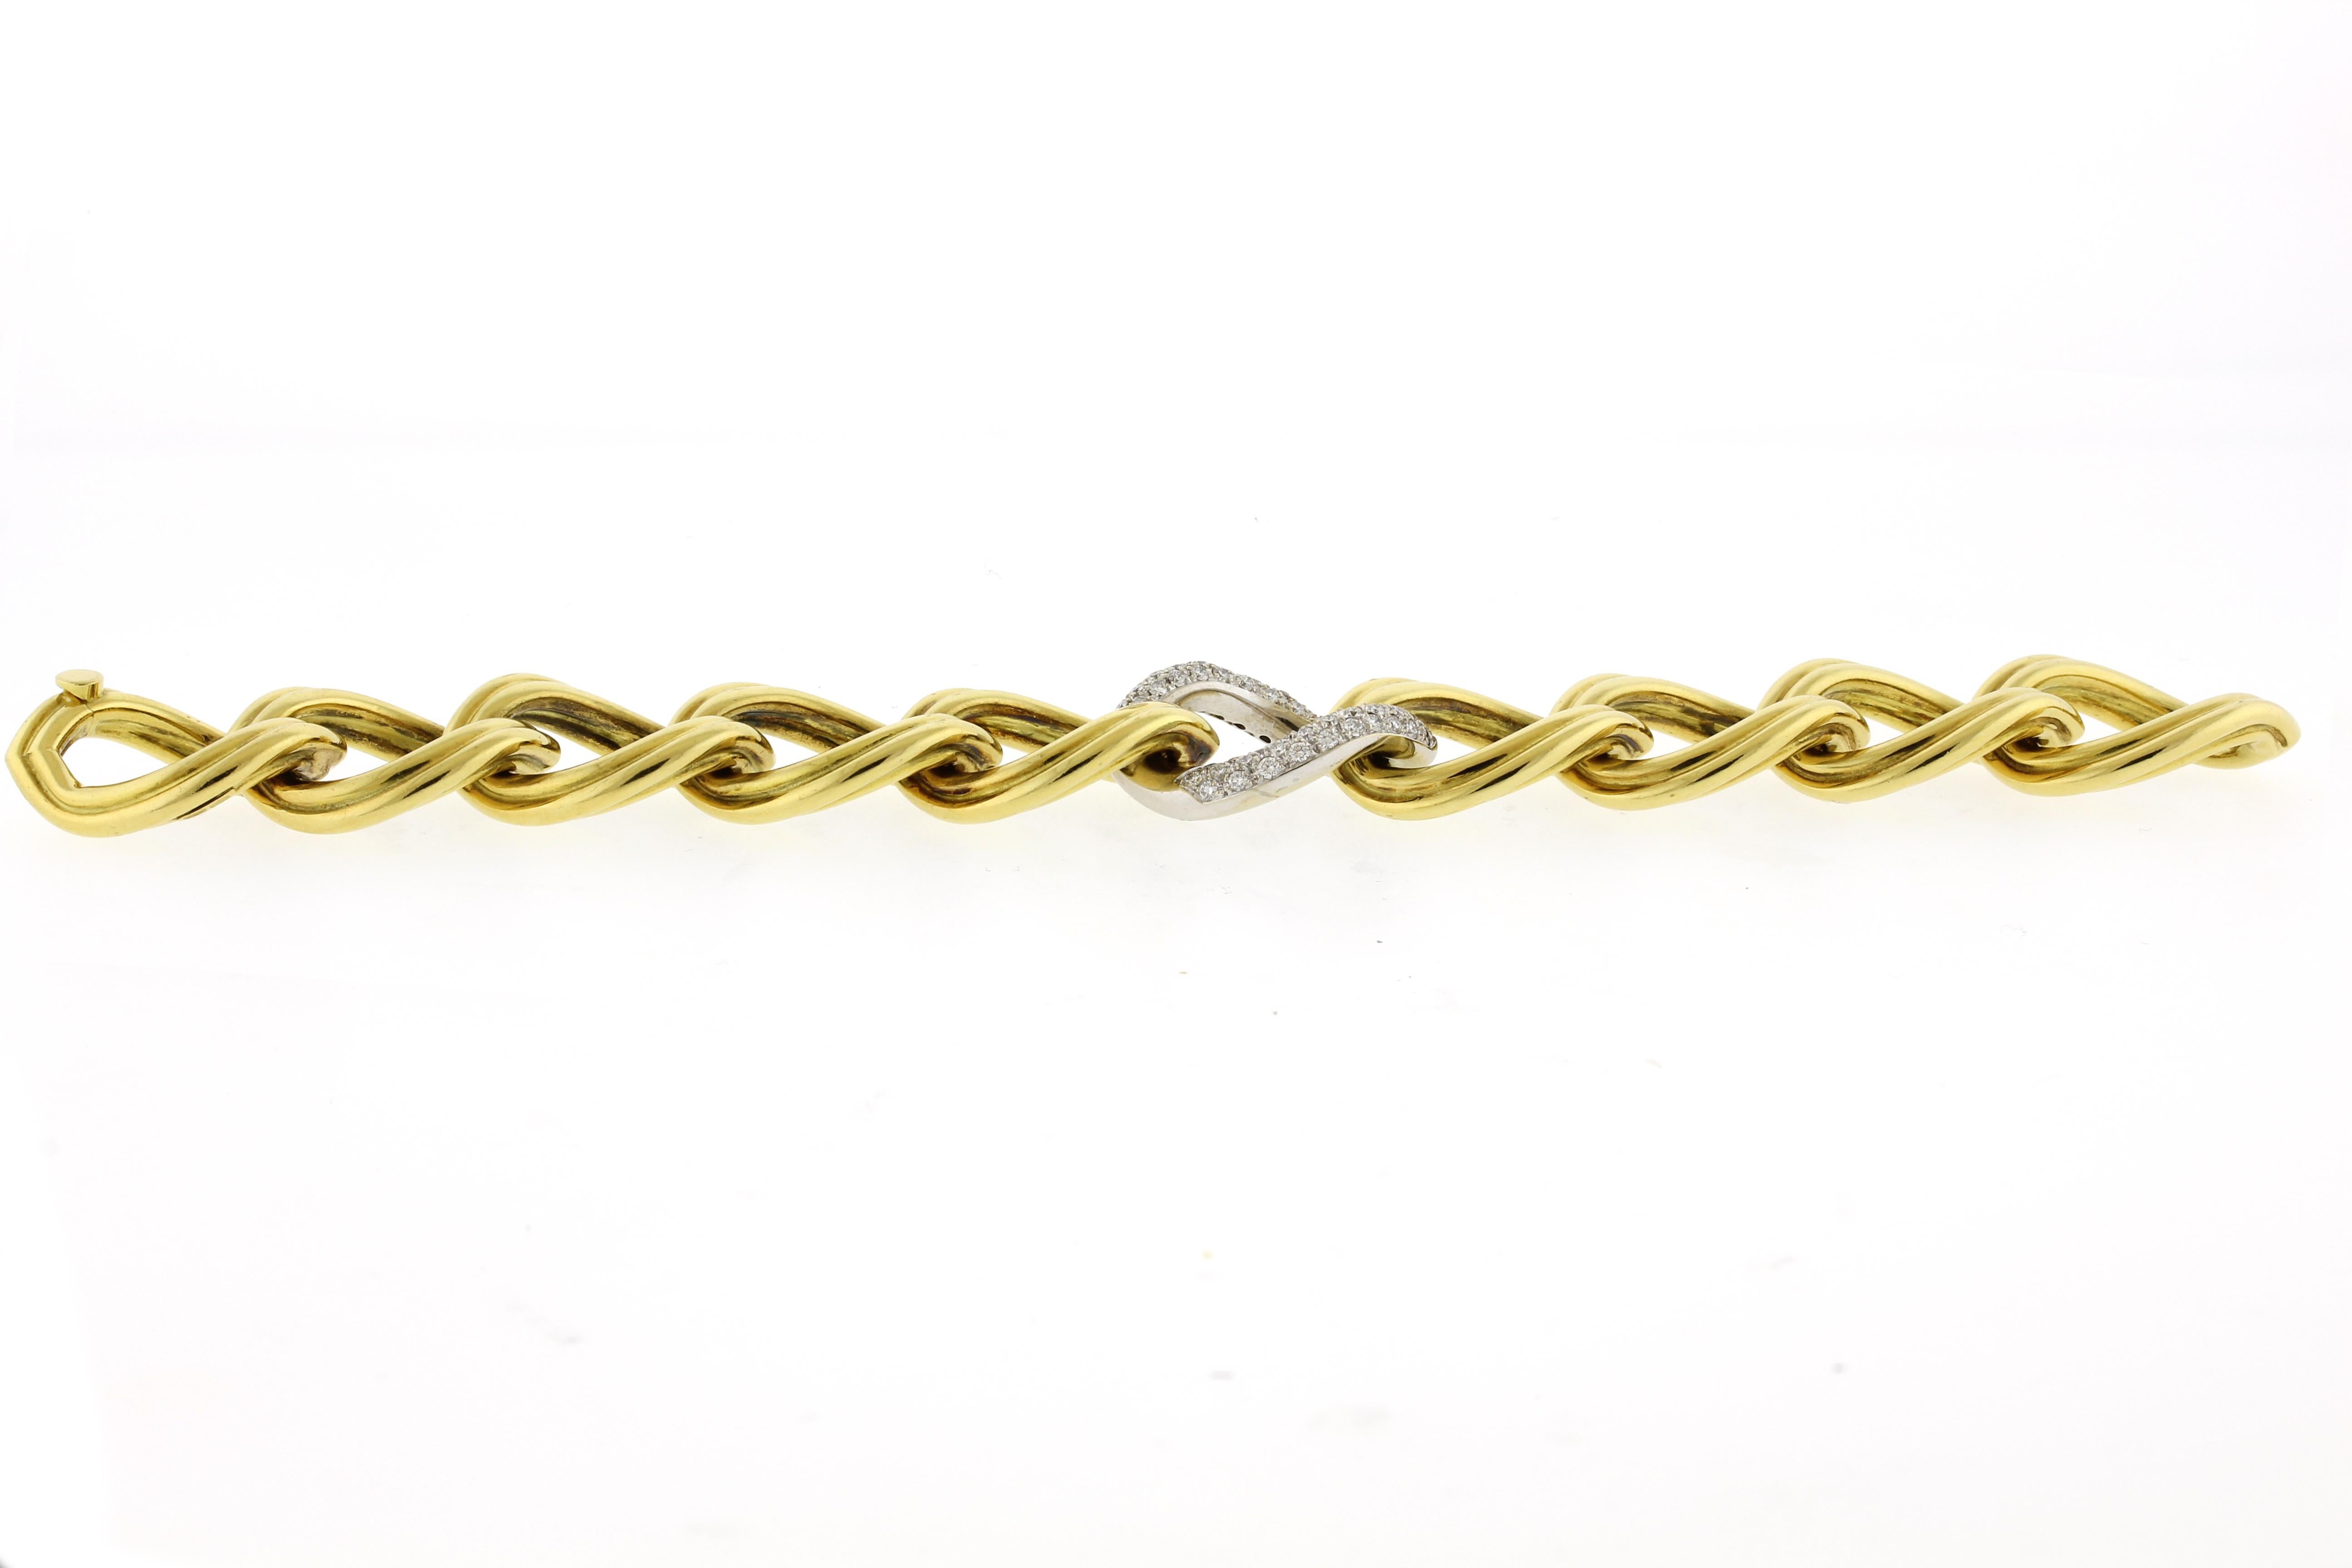 This 18-karat yellow and white gold bracelet features fluted large oval links and one center with pave diamonds.  The diamonds are G color and VS clarity.
♦ Metal: 18 Karat
♦ Length: 8 inches
♦ Width: 3/4 of an inch
♦ Diamonds: 70=1.66cts
♦ Weight: